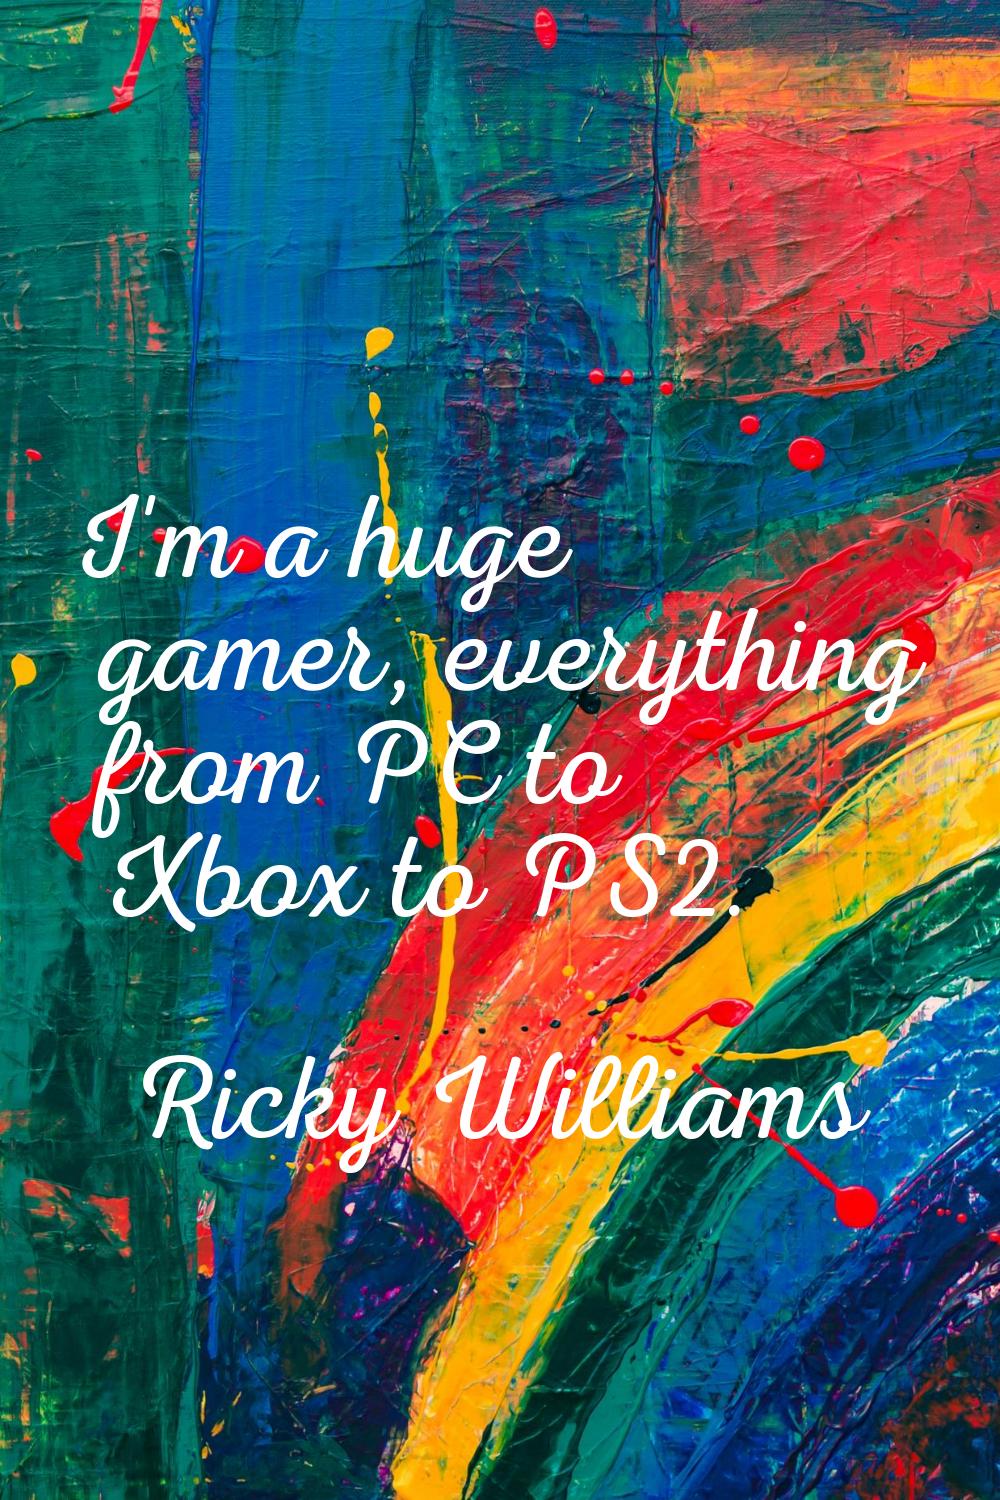 I'm a huge gamer, everything from PC to Xbox to PS2.